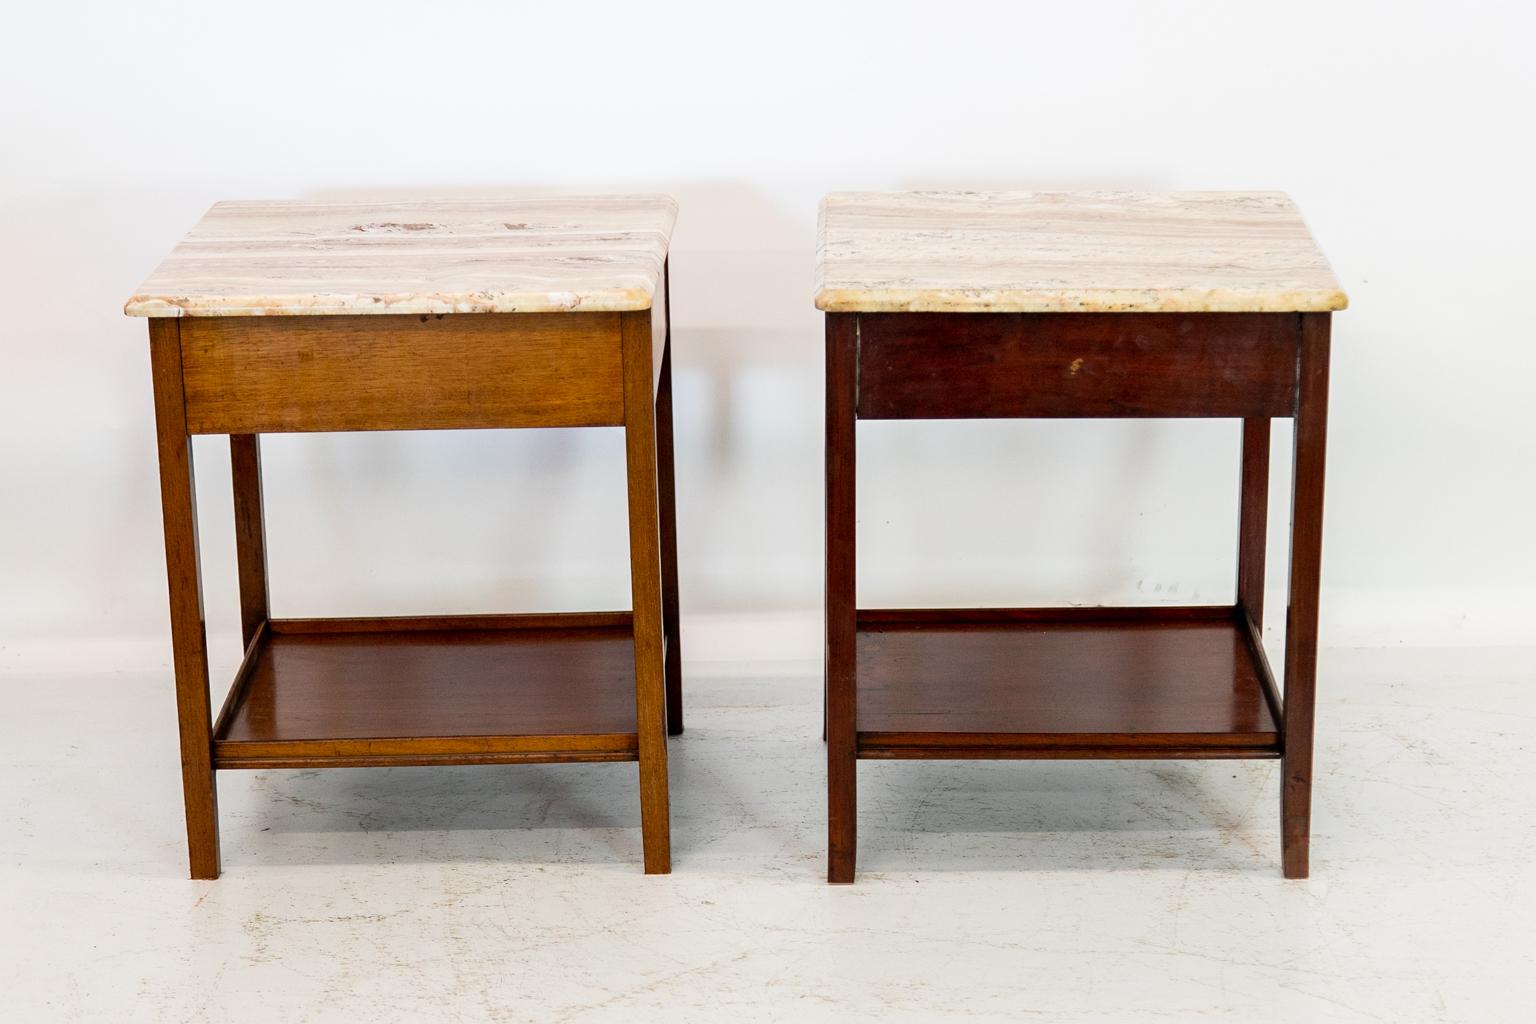 Early 20th Century Pair of Marble-Top End Tables